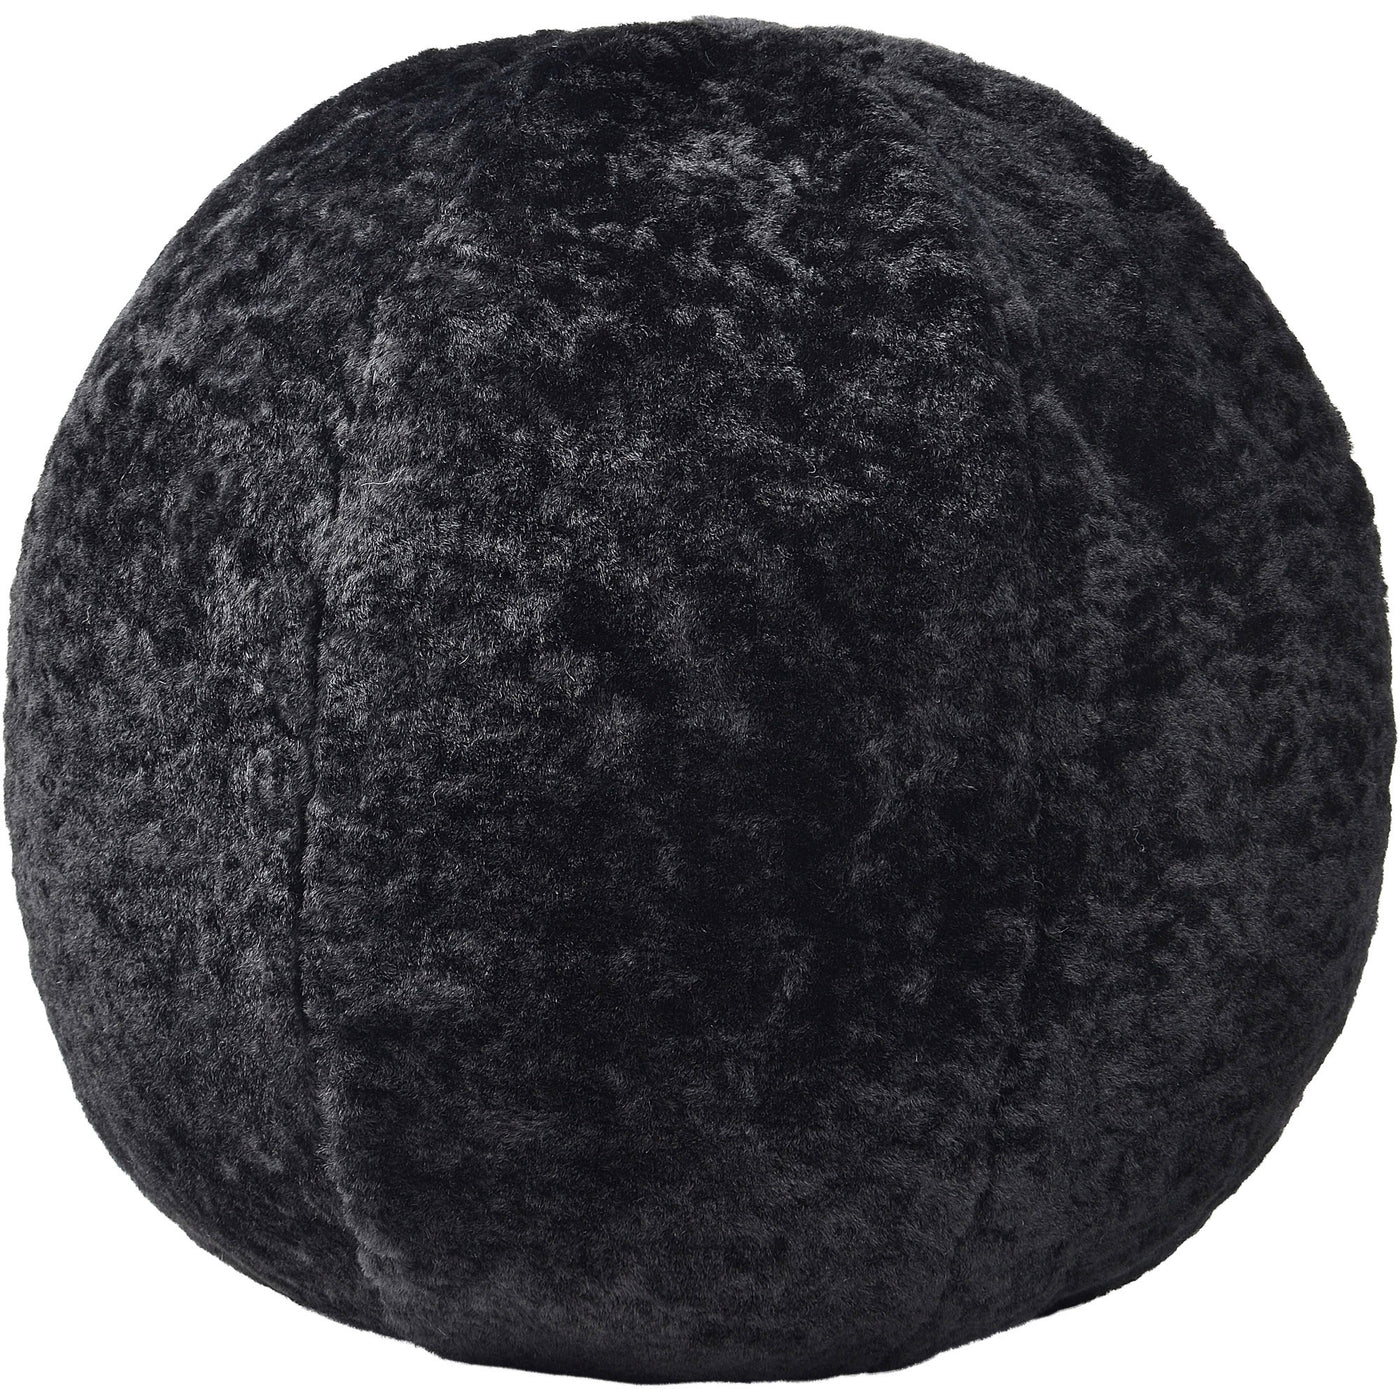 Fred Round Accent Pillow- Black